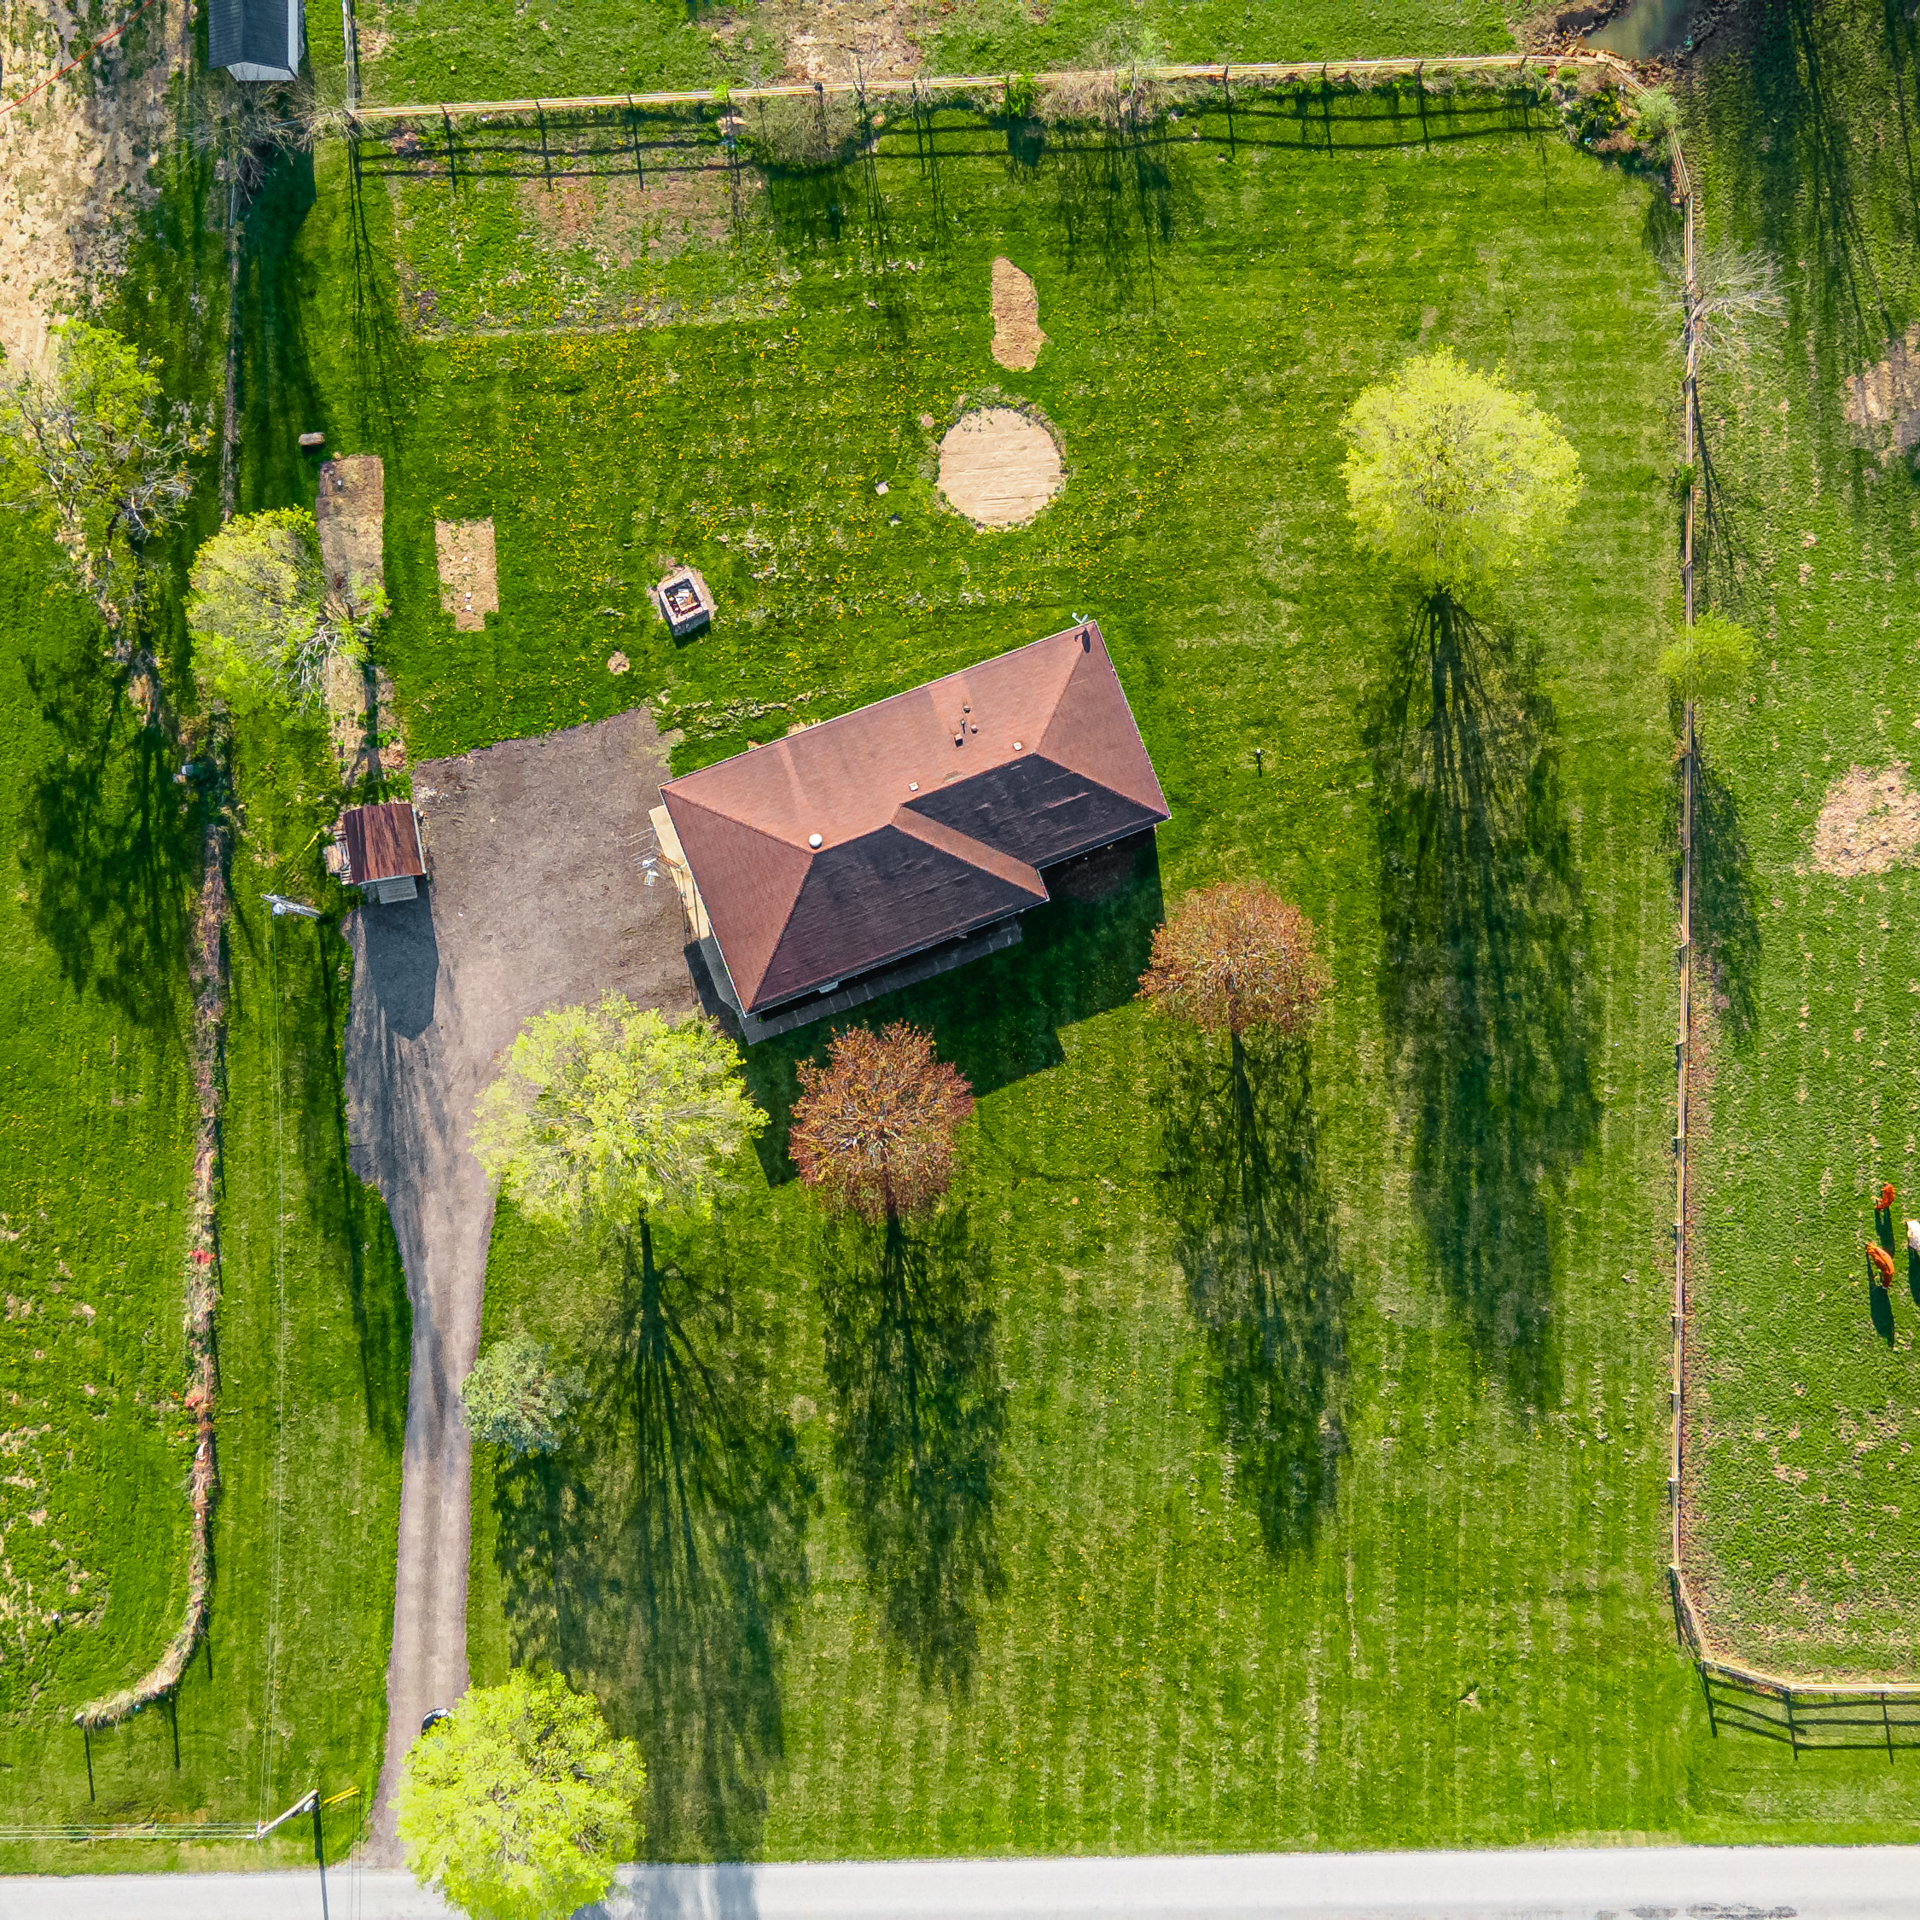 Drone image of property lines